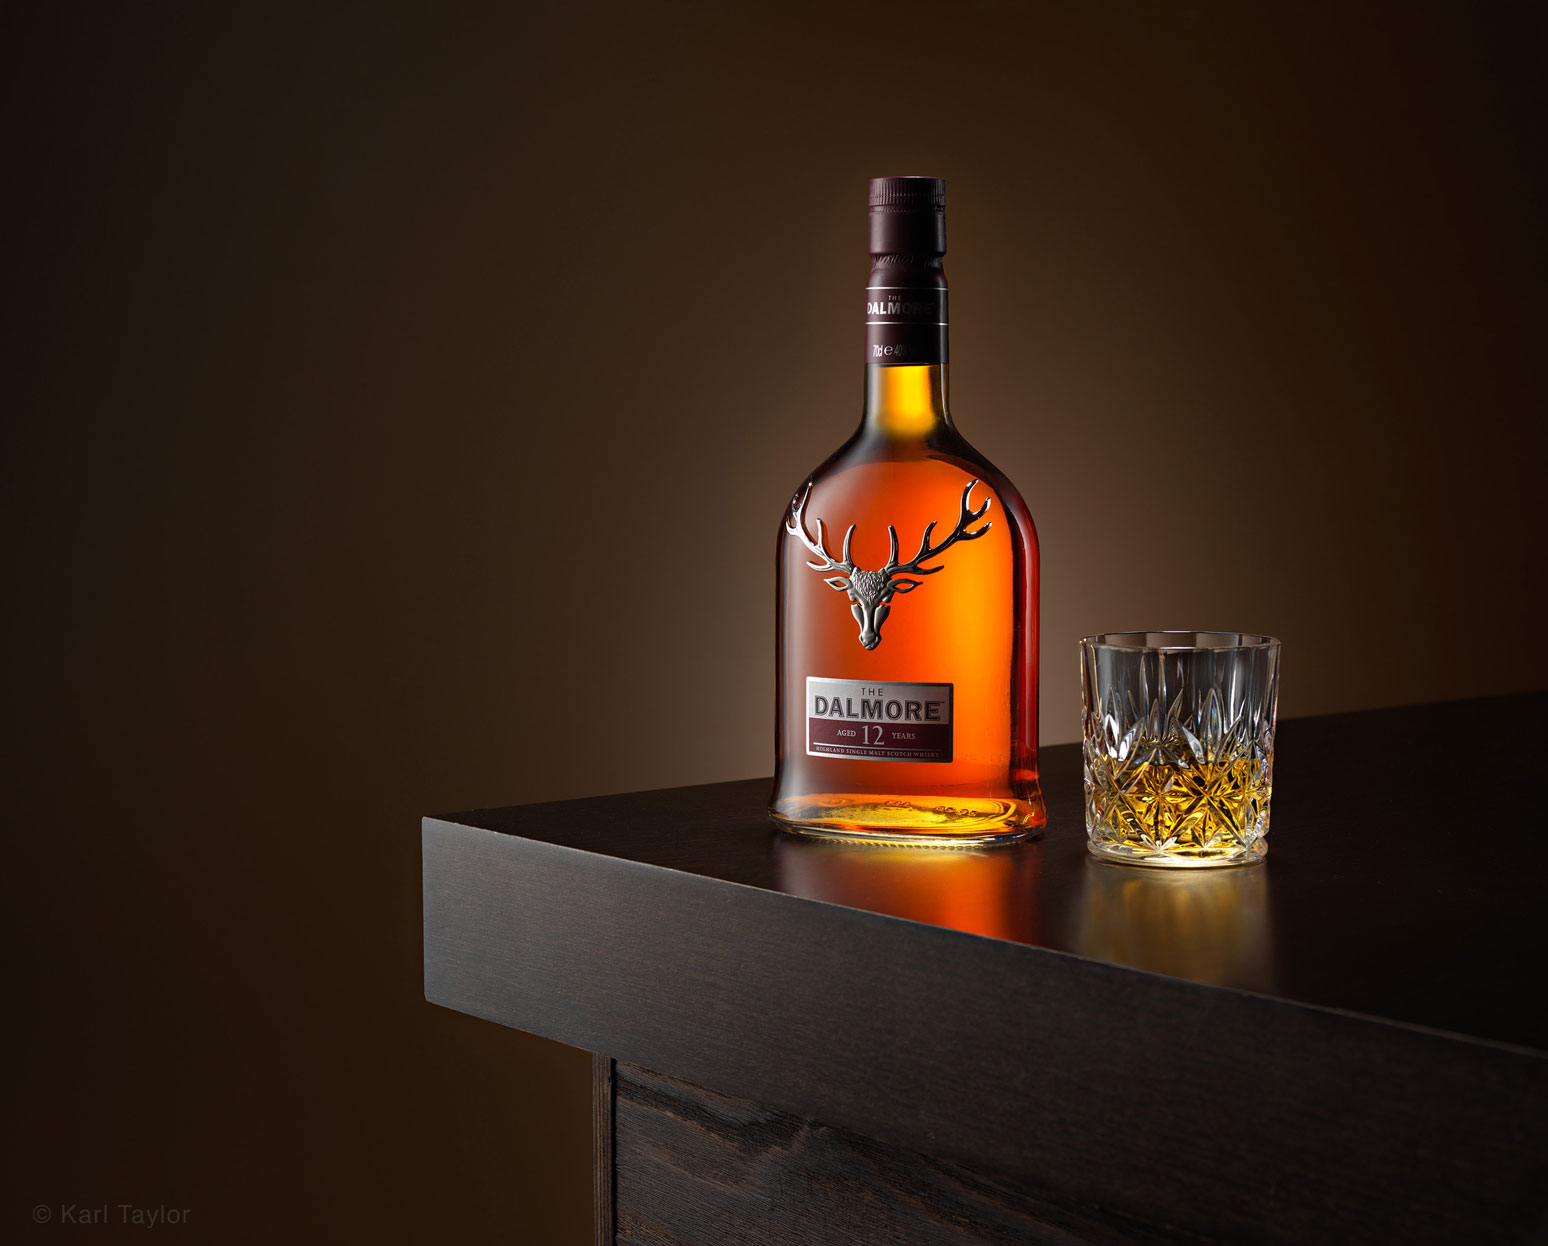 Bottle photography by Karl Taylor